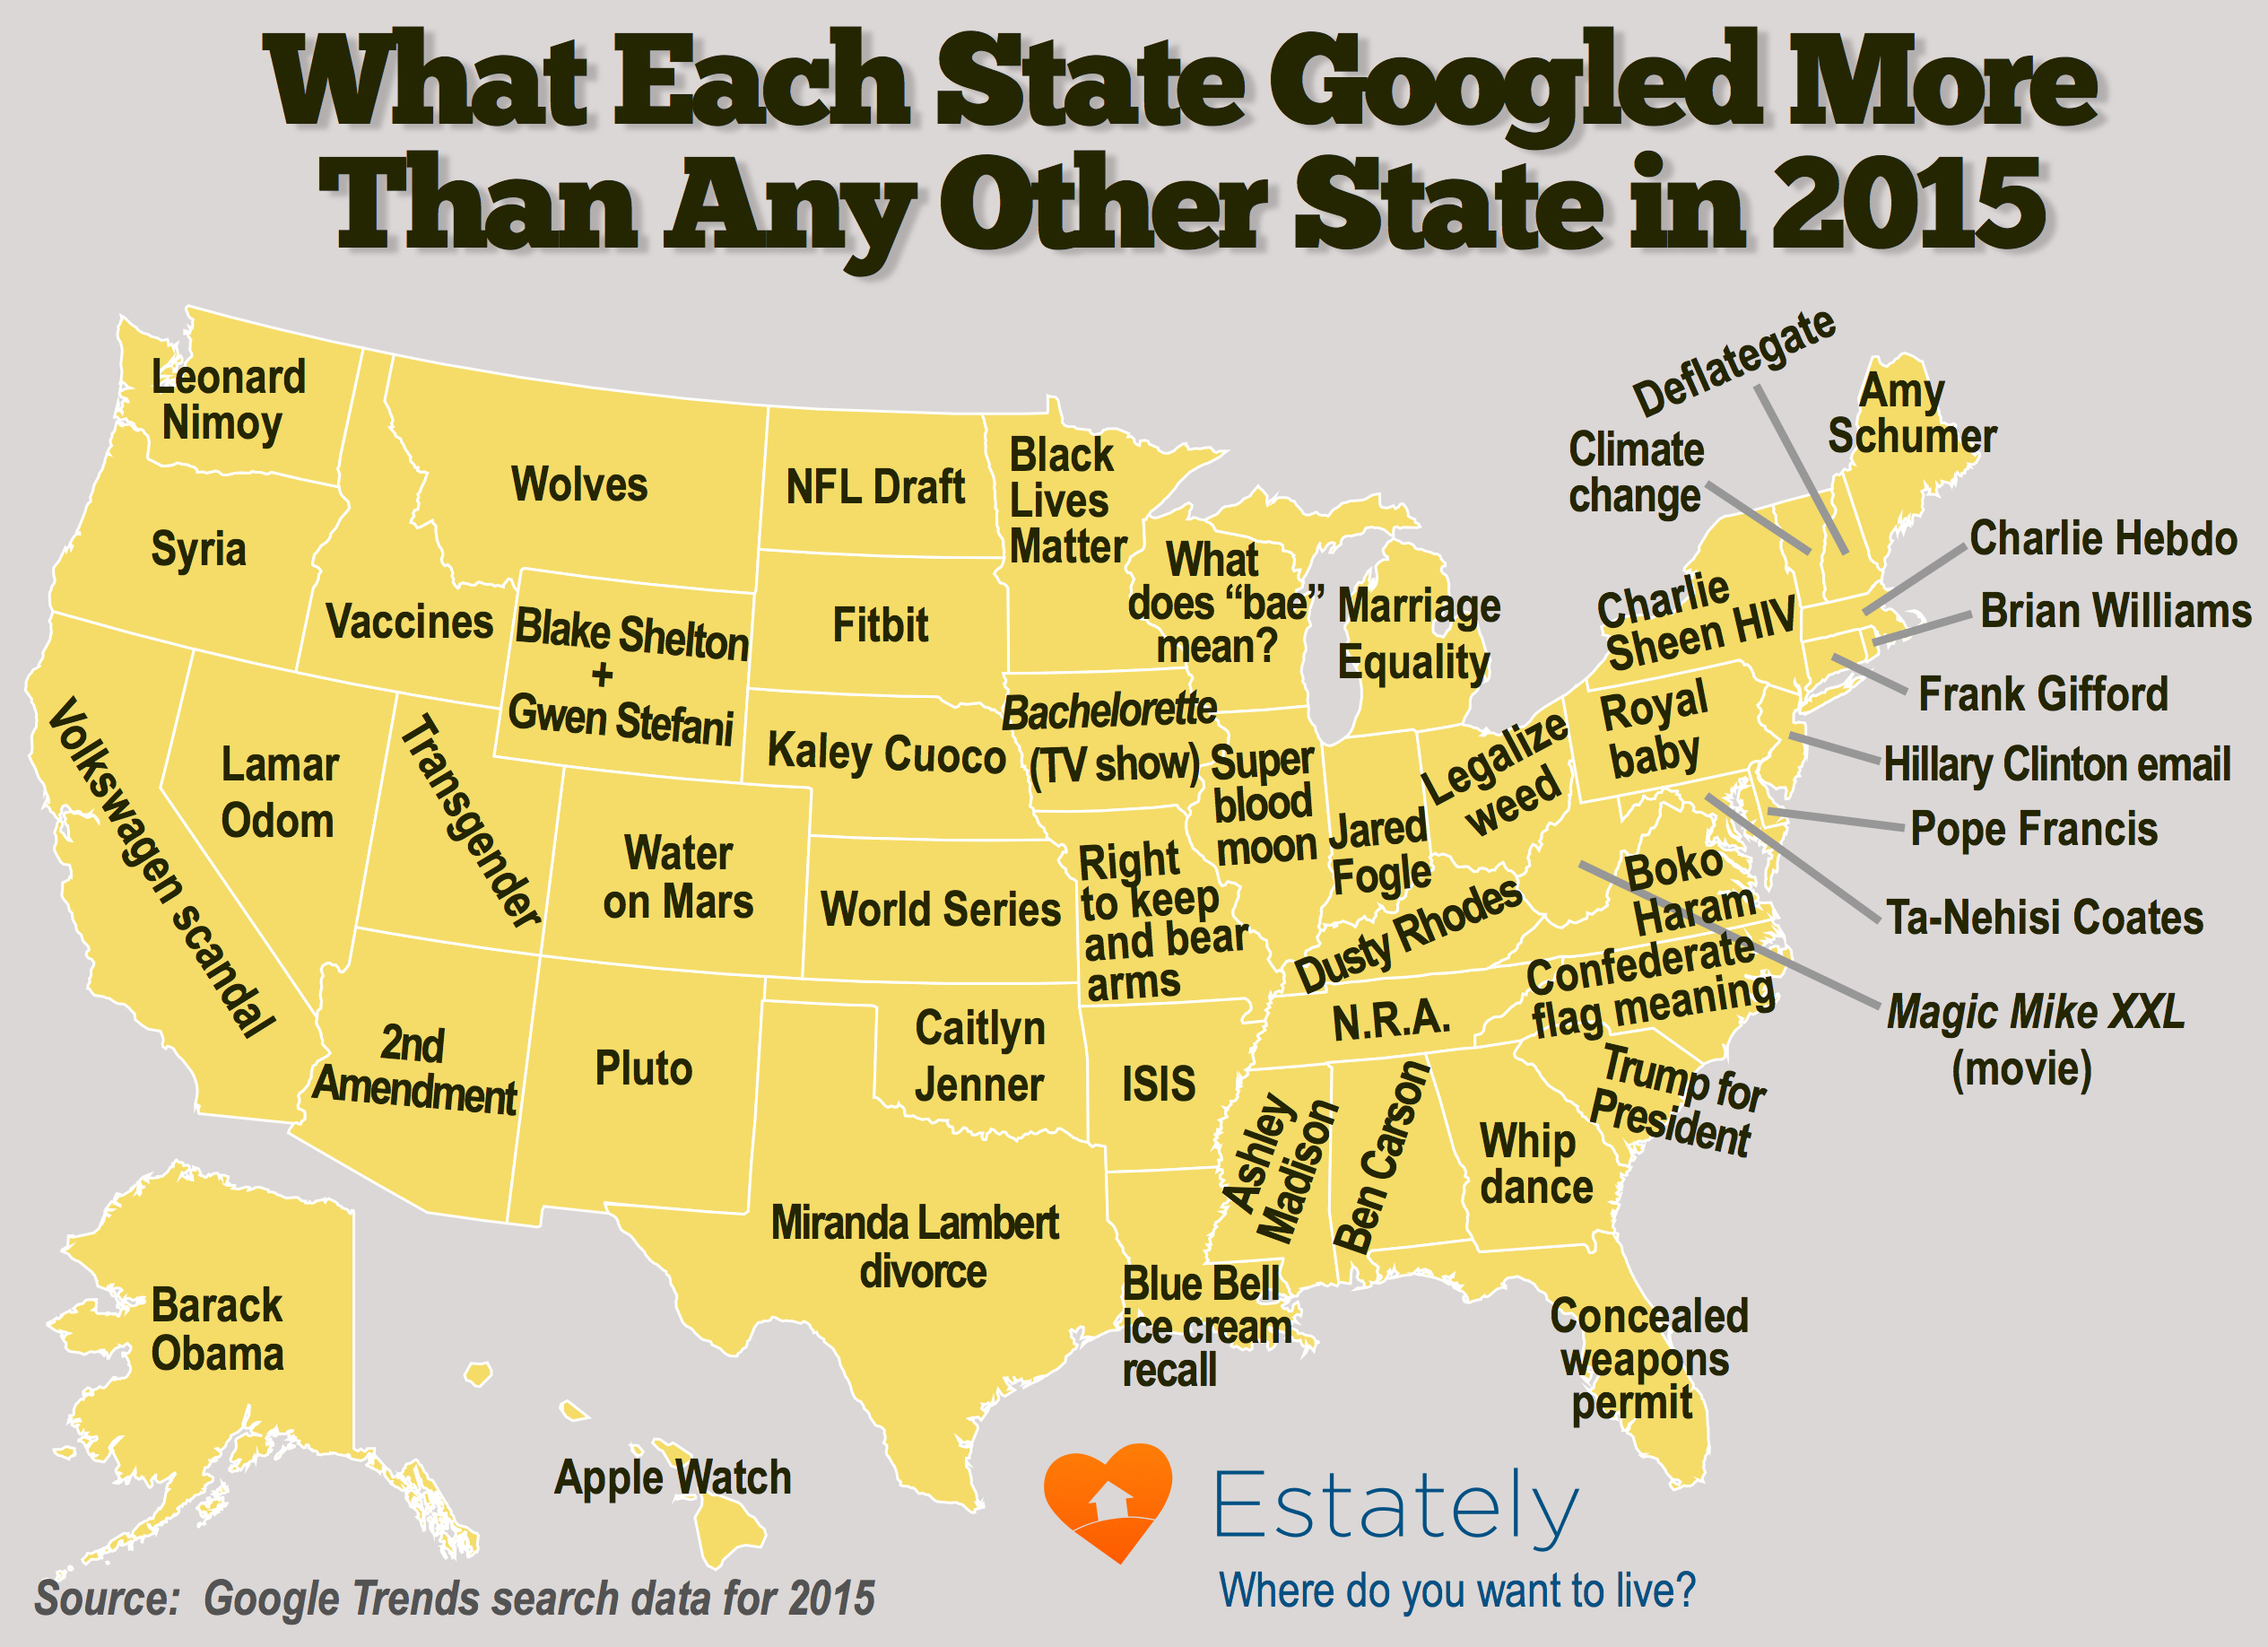 Google search data shows what people in each state searched for most in